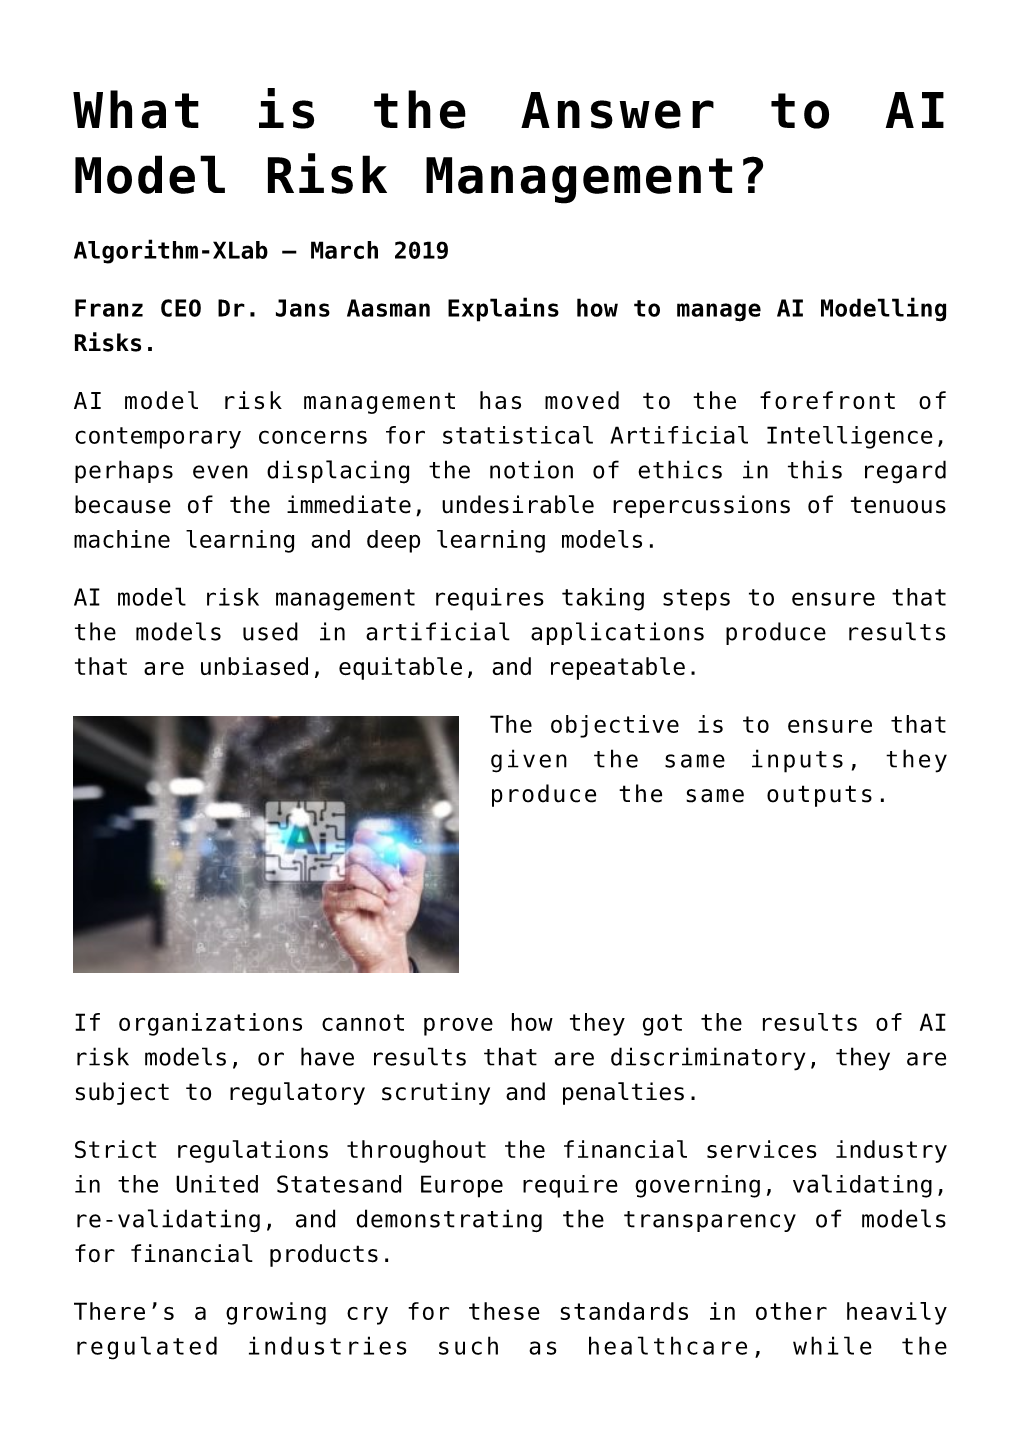 What Is the Answer to AI Model Risk Management?